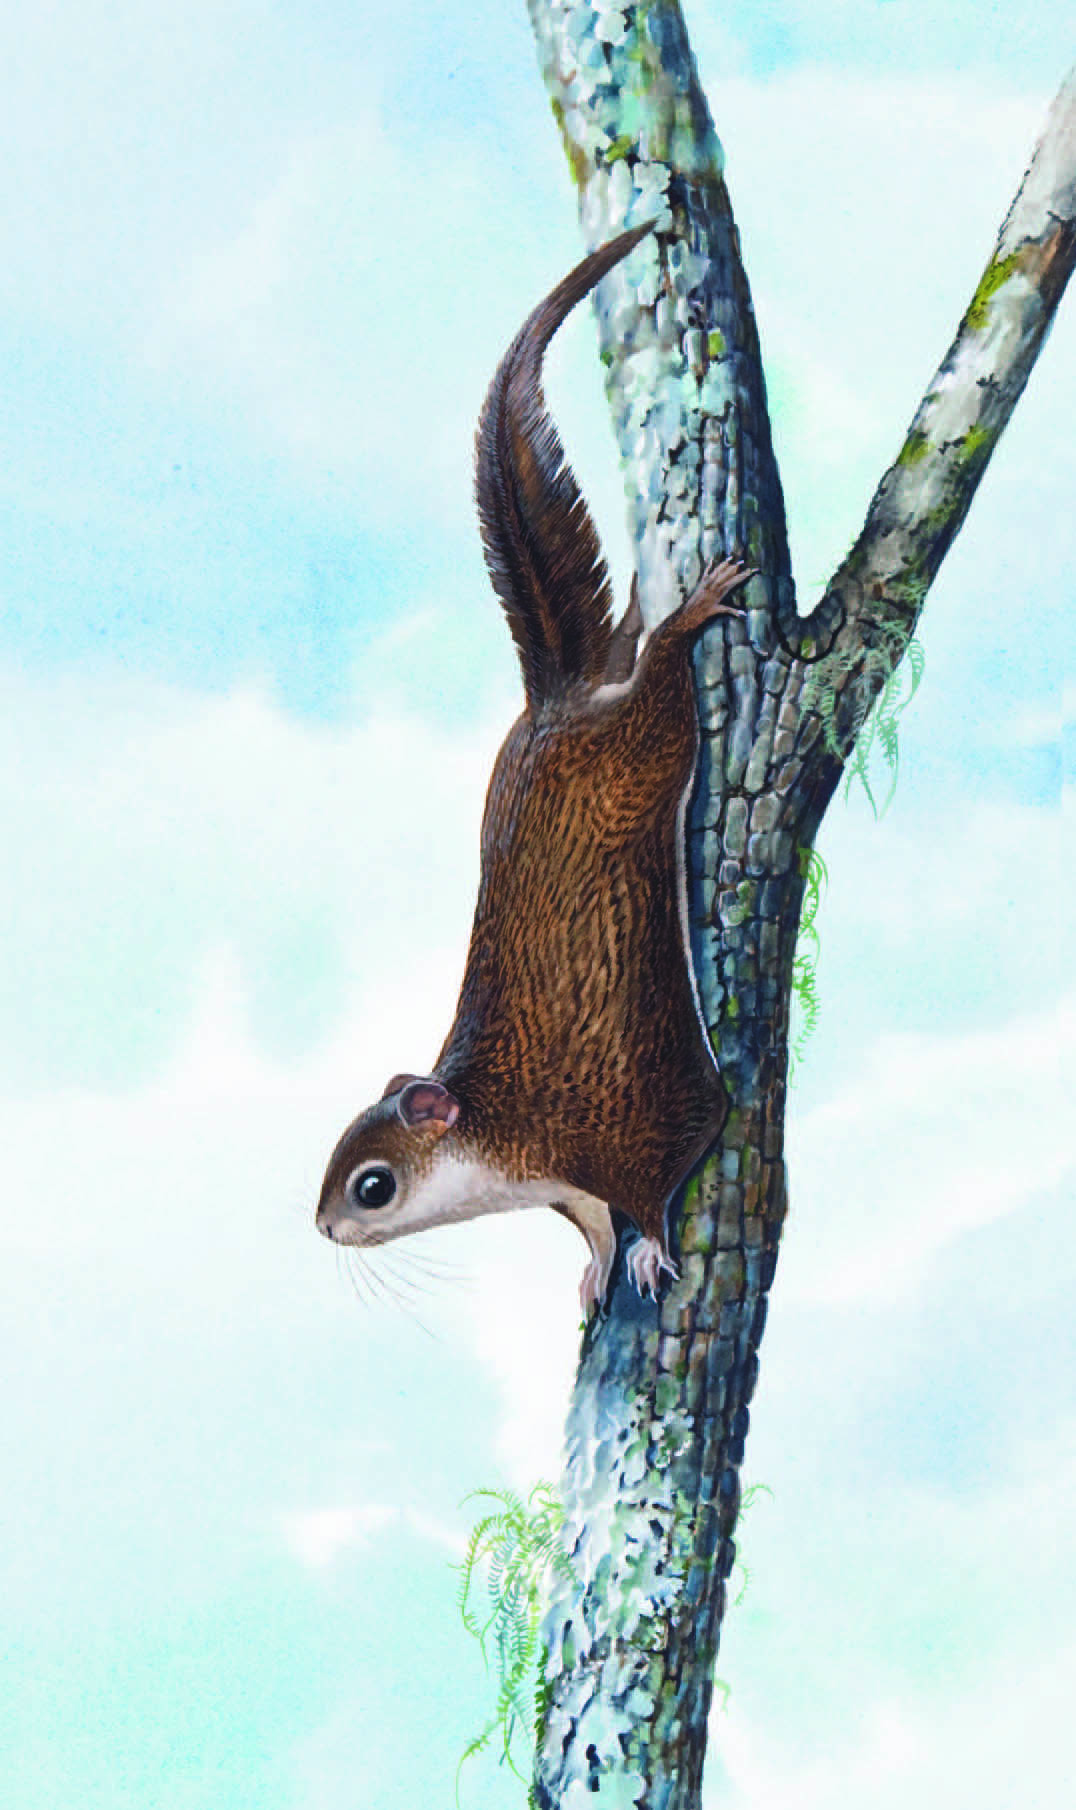 The Japanese Flying Squirrel weighs about 200 grams and is capable of gliding up to 100 metres